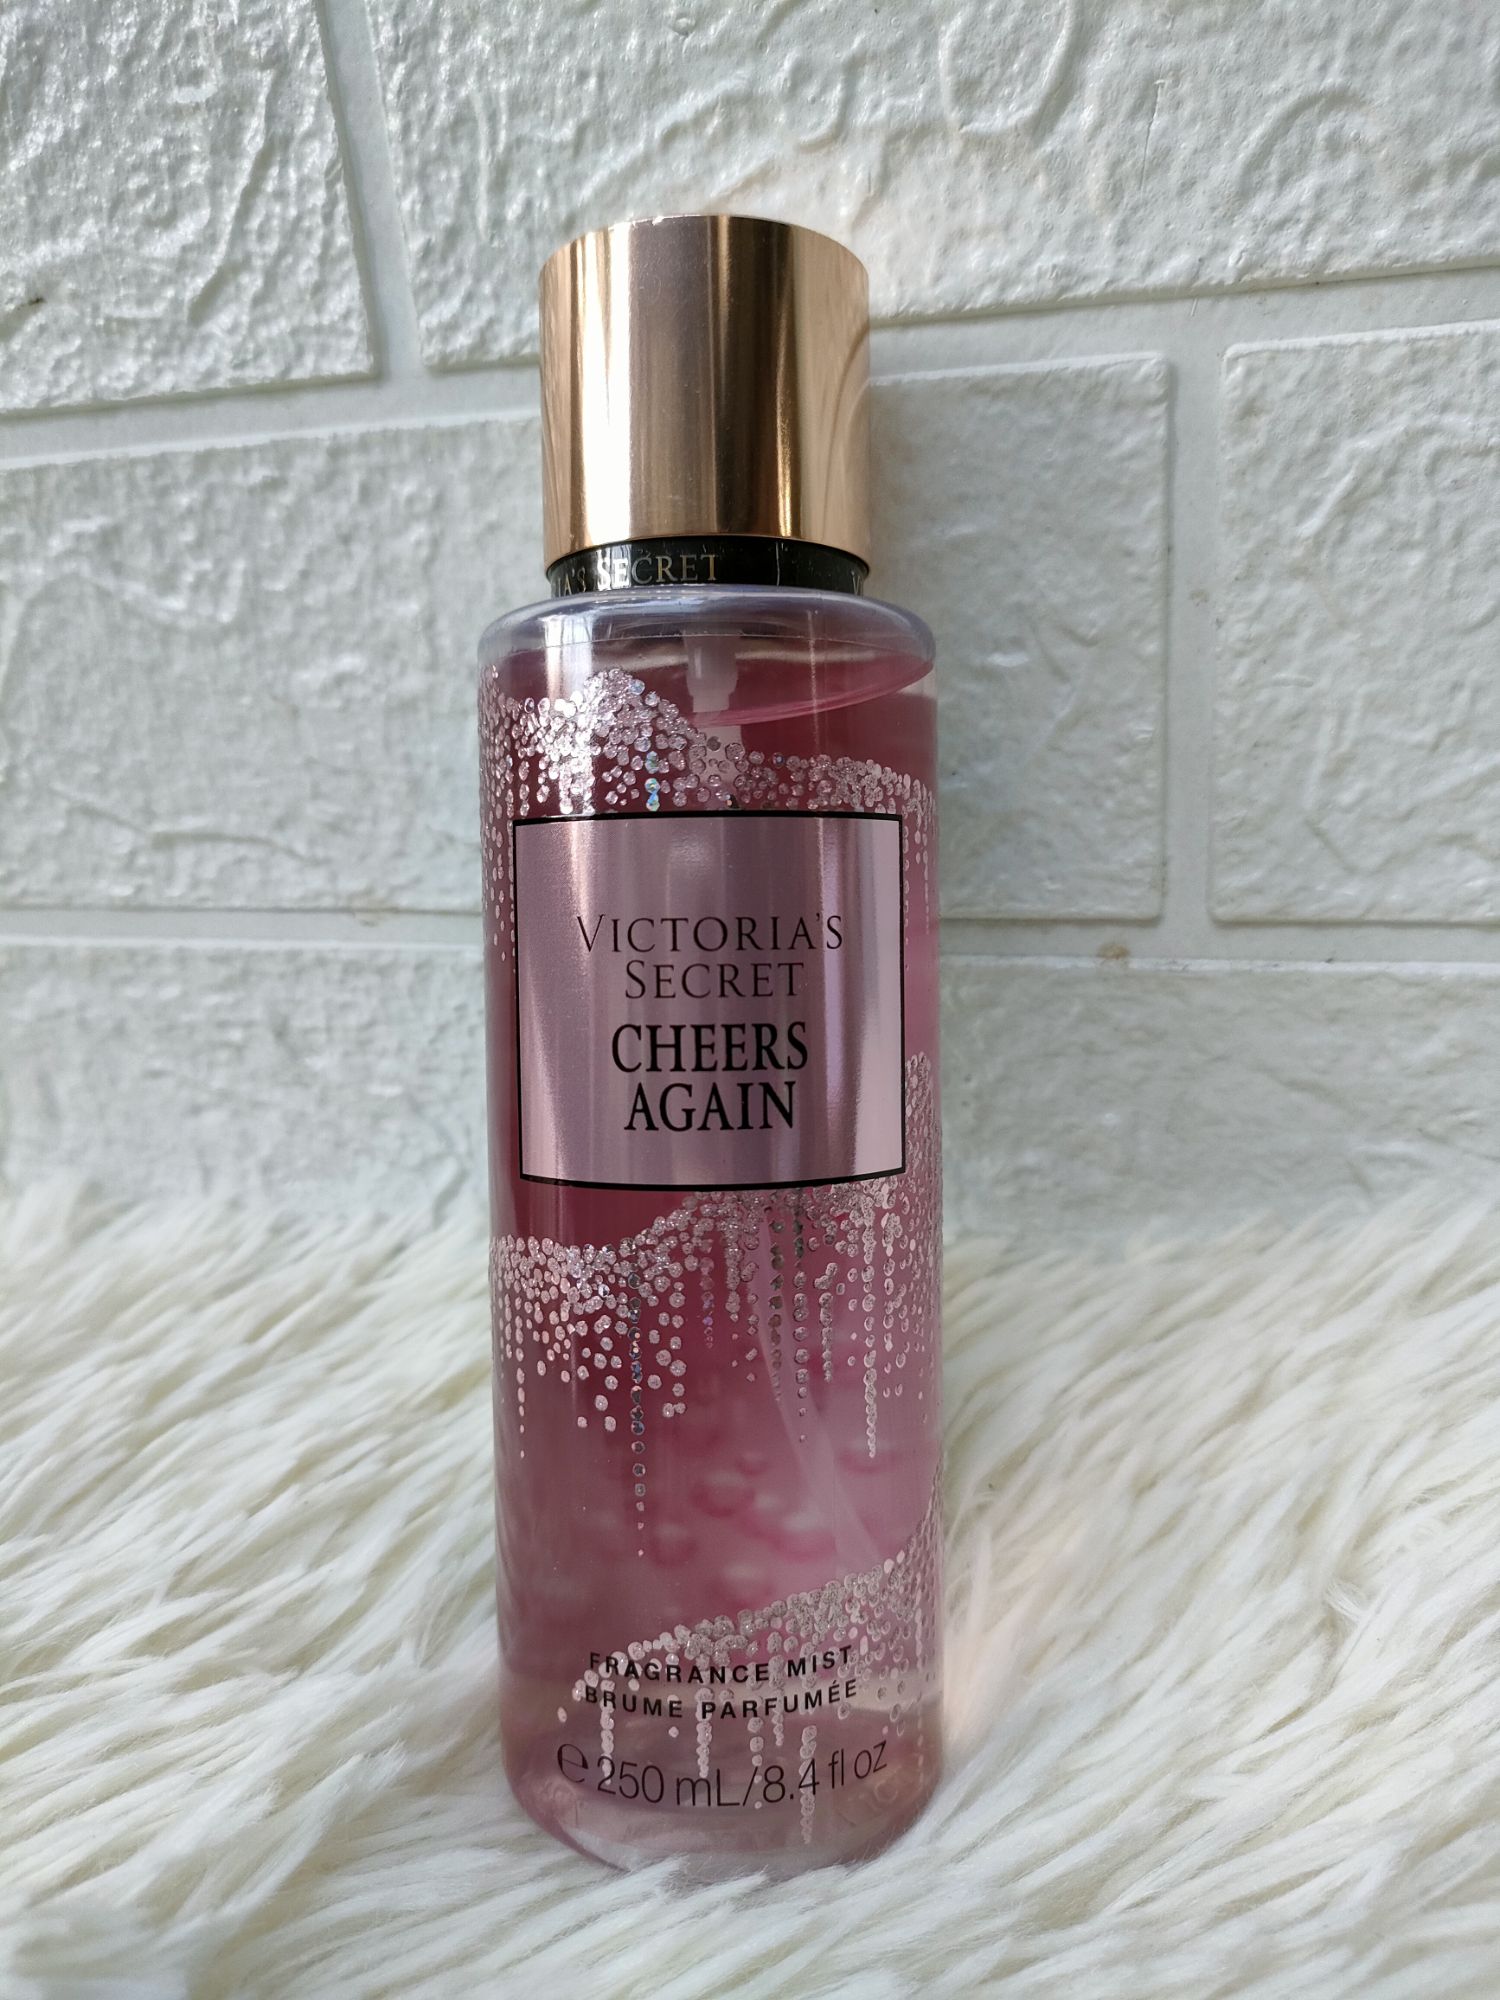 Victoria's Secret Cheers Again 250 ml from USA